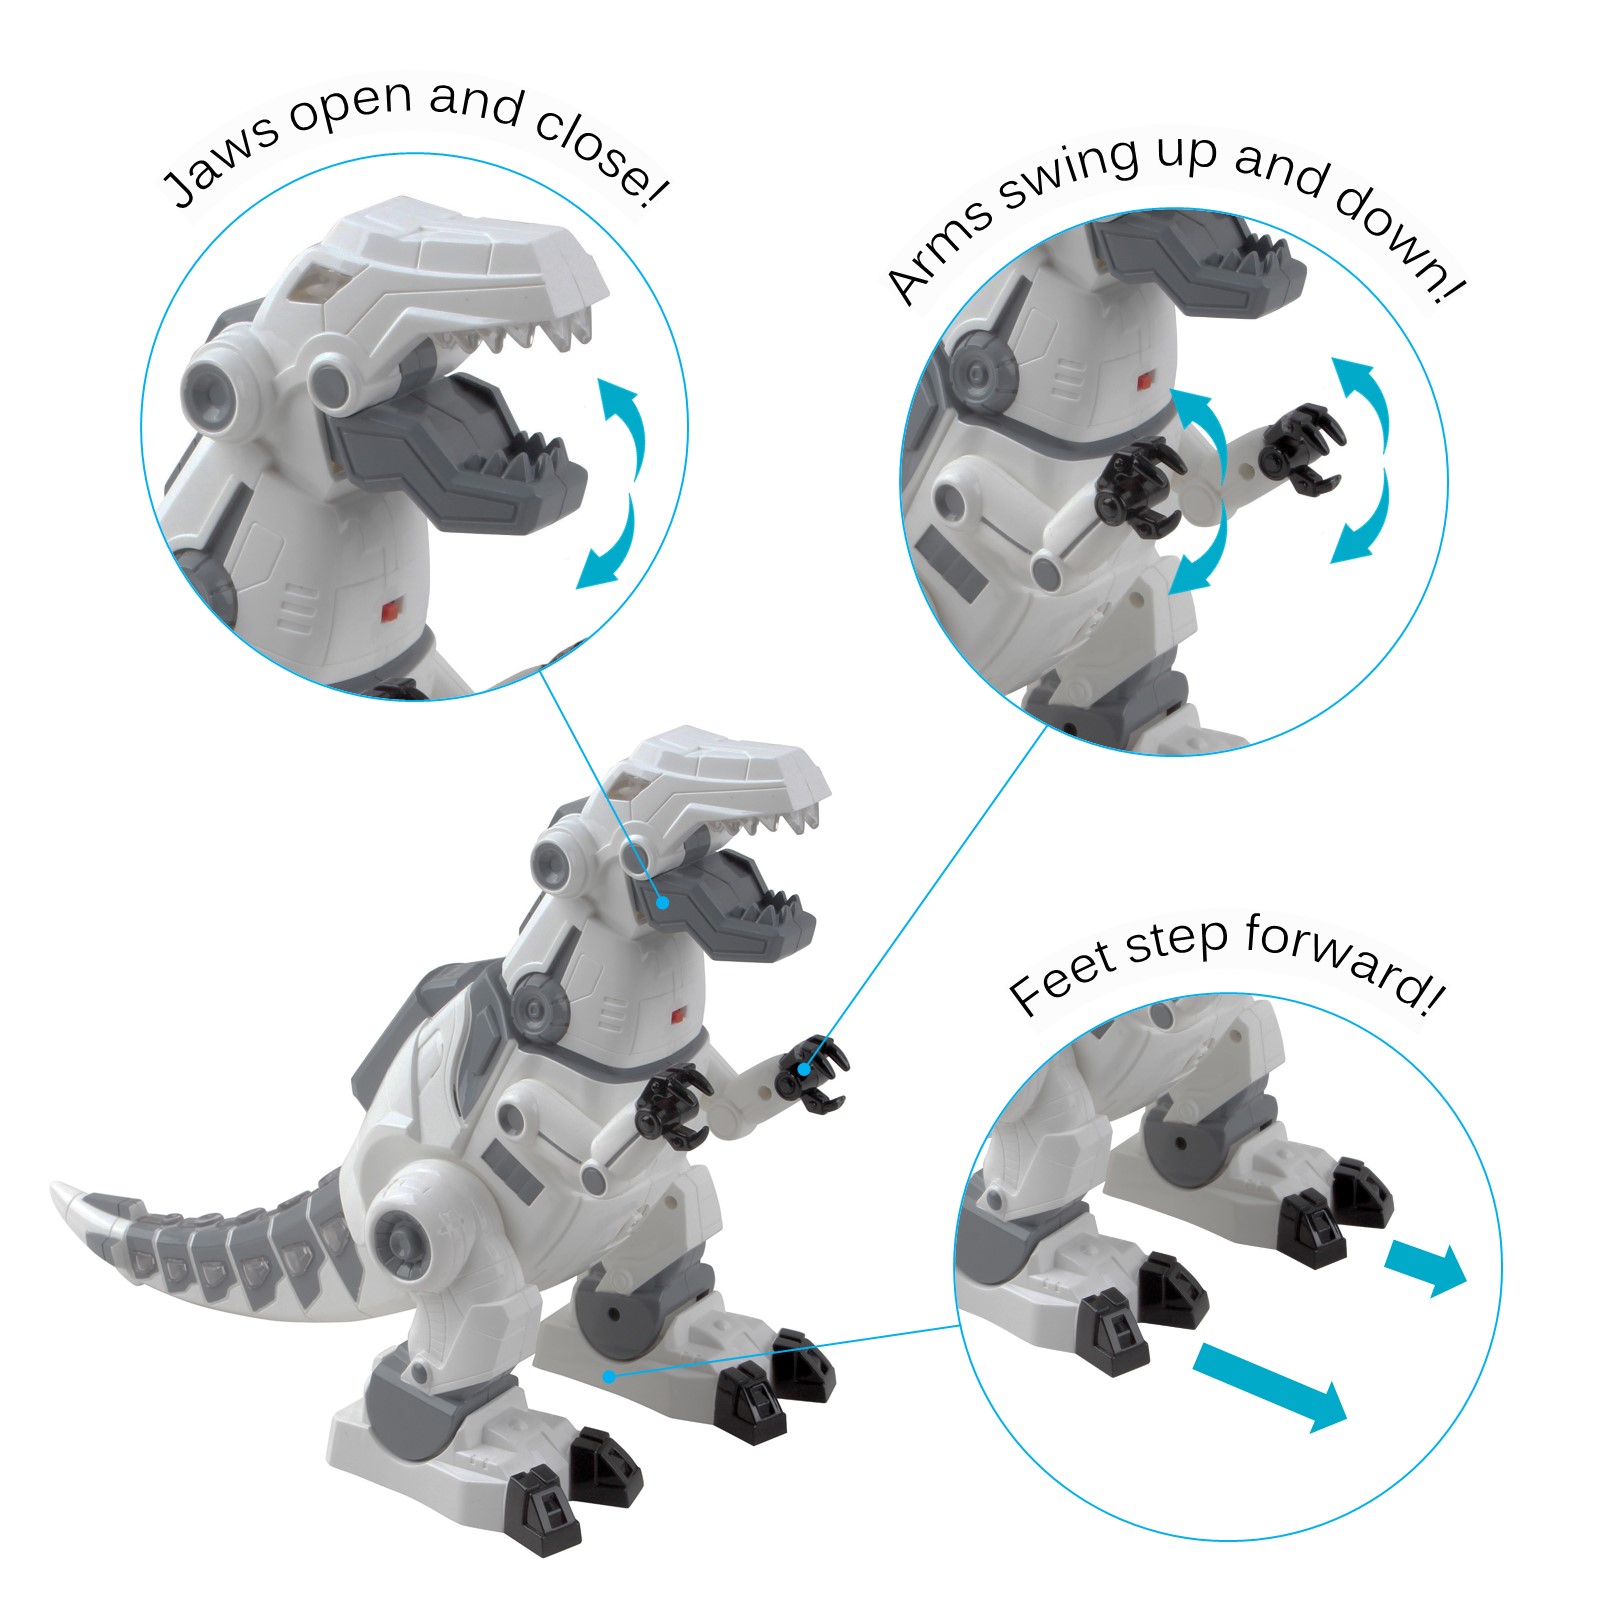 Tyrannosaurus rex Walking Robot Dinosaur With Flashing Lights And Sounds Interactive Kids Toy Smart Robotic T-Rex Pet Easy To Use Function Perfect Action For Boys Girls Toddlers Battery Operated White TB-80